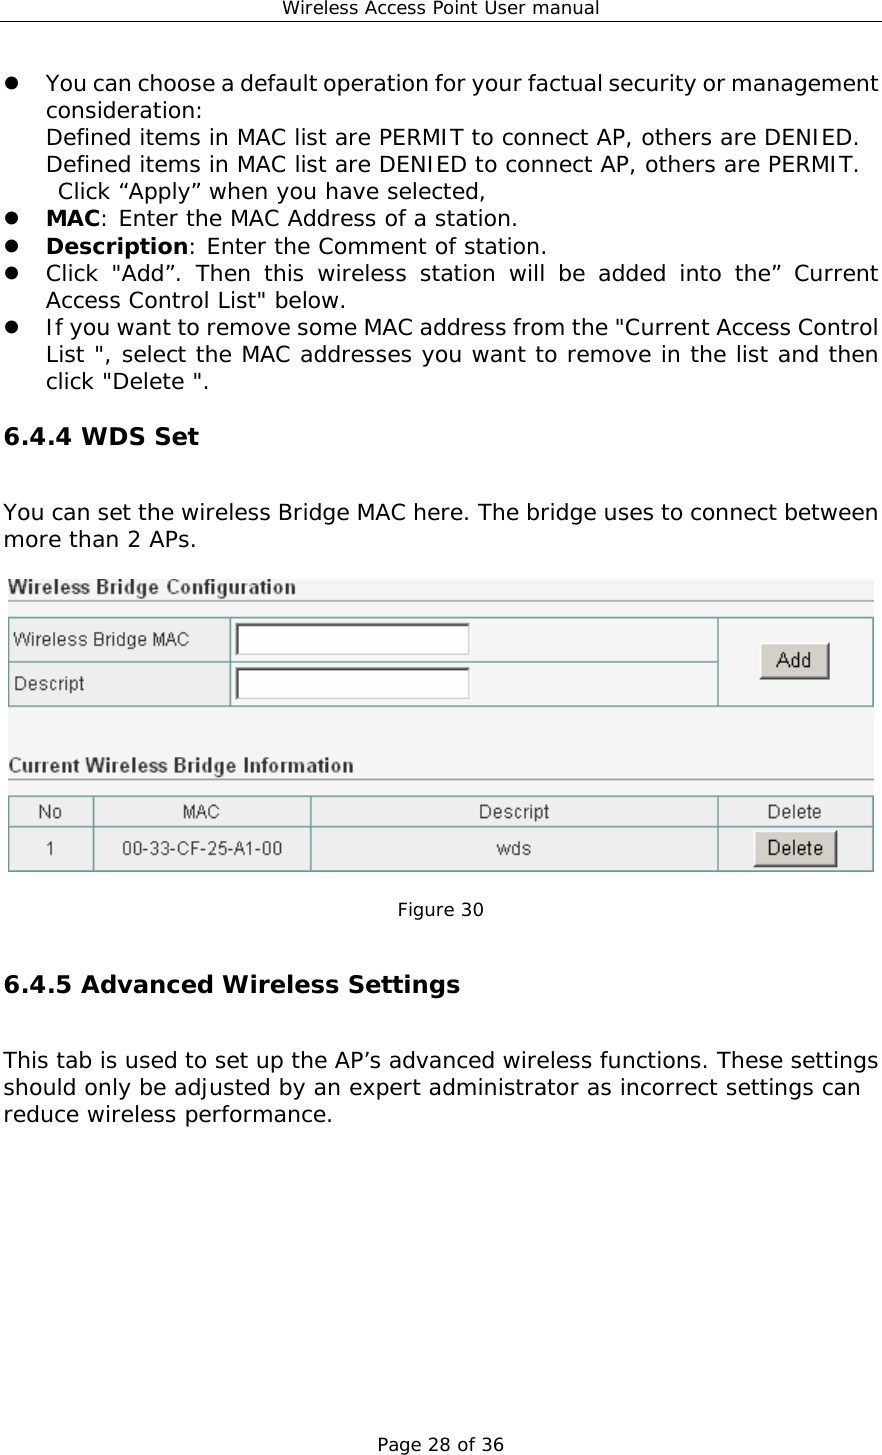 Wireless Access Point User manual Page 28 of 36 z You can choose a default operation for your factual security or management consideration: Defined items in MAC list are PERMIT to connect AP, others are DENIED. Defined items in MAC list are DENIED to connect AP, others are PERMIT. Click “Apply” when you have selected,  z MAC: Enter the MAC Address of a station.  z Description: Enter the Comment of station. z Click &quot;Add”. Then this wireless station will be added into the” Current Access Control List&quot; below. z If you want to remove some MAC address from the &quot;Current Access Control List &quot;, select the MAC addresses you want to remove in the list and then click &quot;Delete &quot;. 6.4.4 WDS Set You can set the wireless Bridge MAC here. The bridge uses to connect between more than 2 APs.    Figure 30  6.4.5 Advanced Wireless Settings This tab is used to set up the AP’s advanced wireless functions. These settings should only be adjusted by an expert administrator as incorrect settings can reduce wireless performance.  